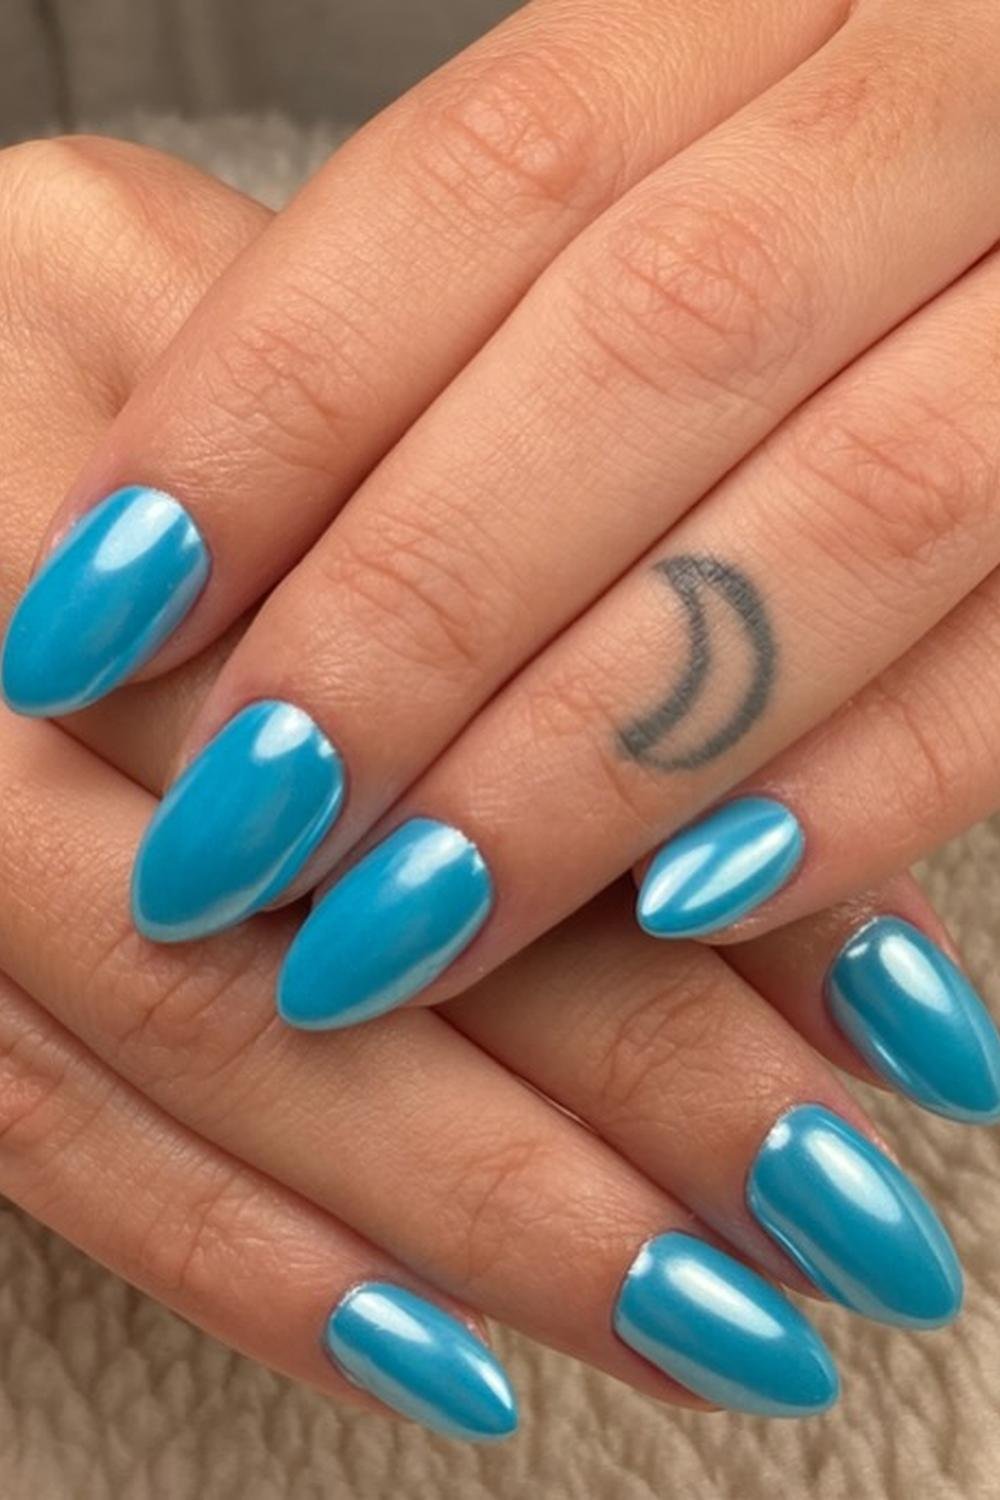 13 - Picture of Blue Chrome Nails